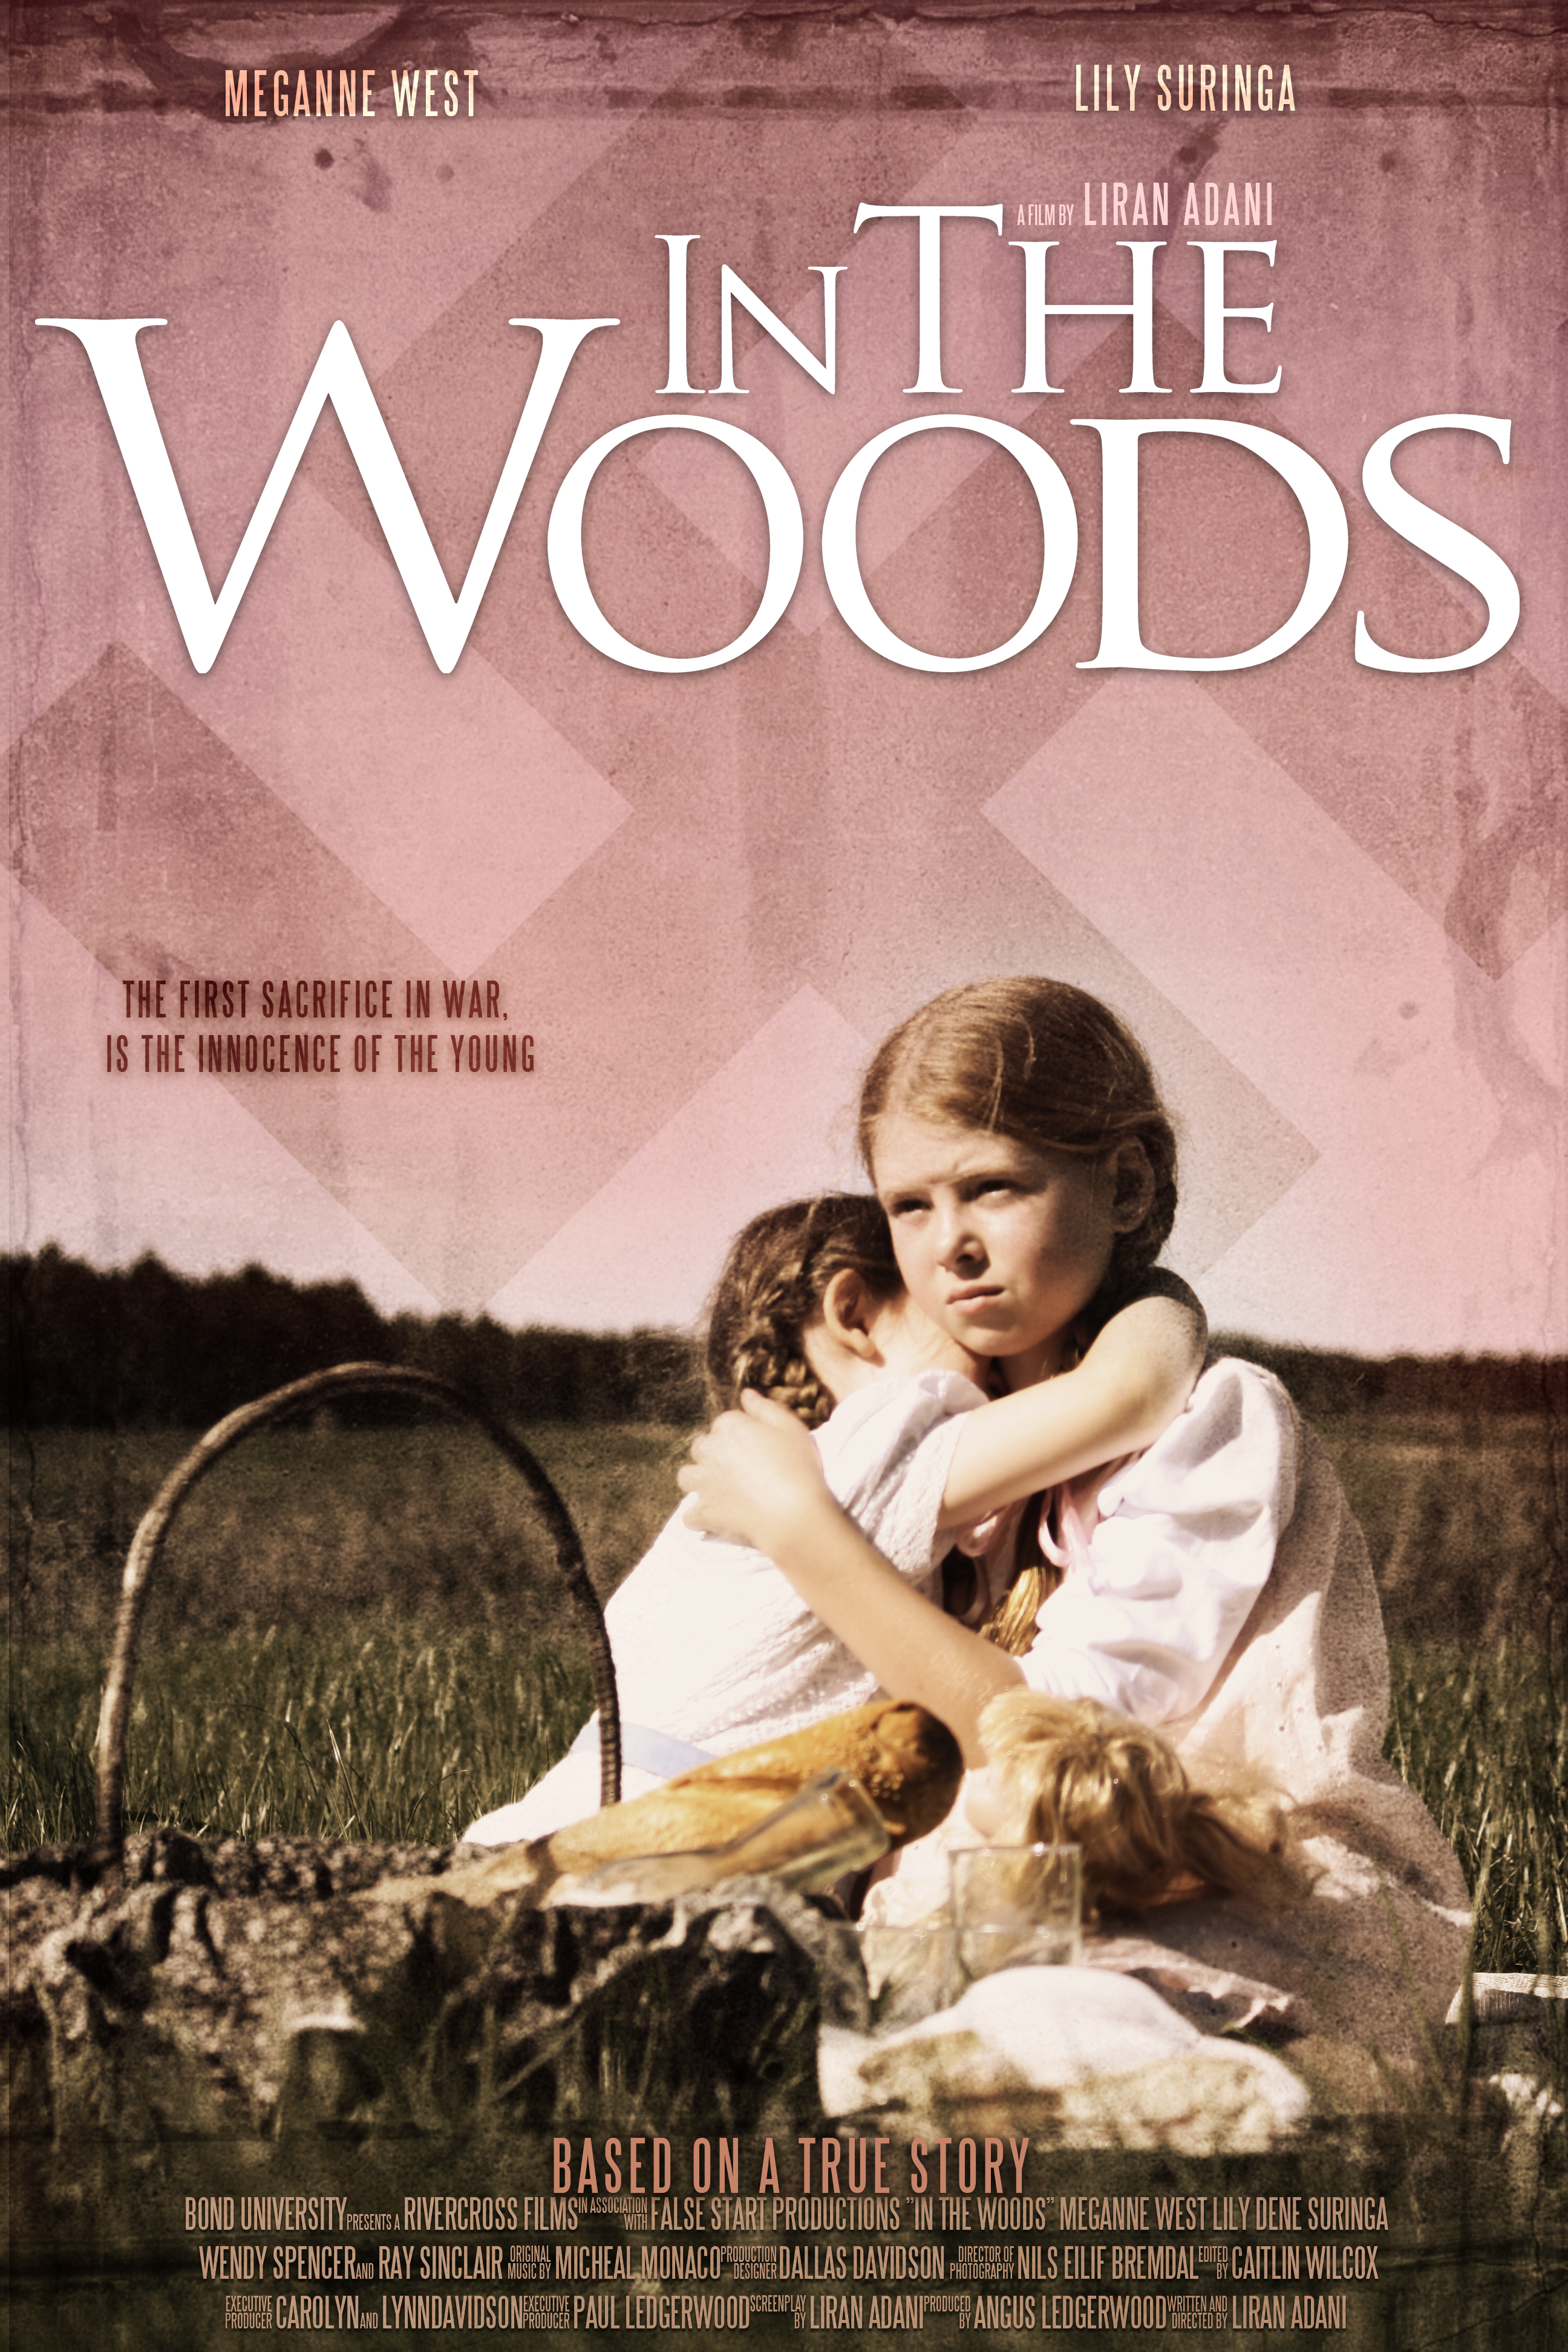 'In the Woods' tells the story of two little Jewish sisters during WWII pretending to be Catholic to save their life. Leaving everything behind, the girls try to prove that they can run away like, their older siblings, but when the escape plan is harder t